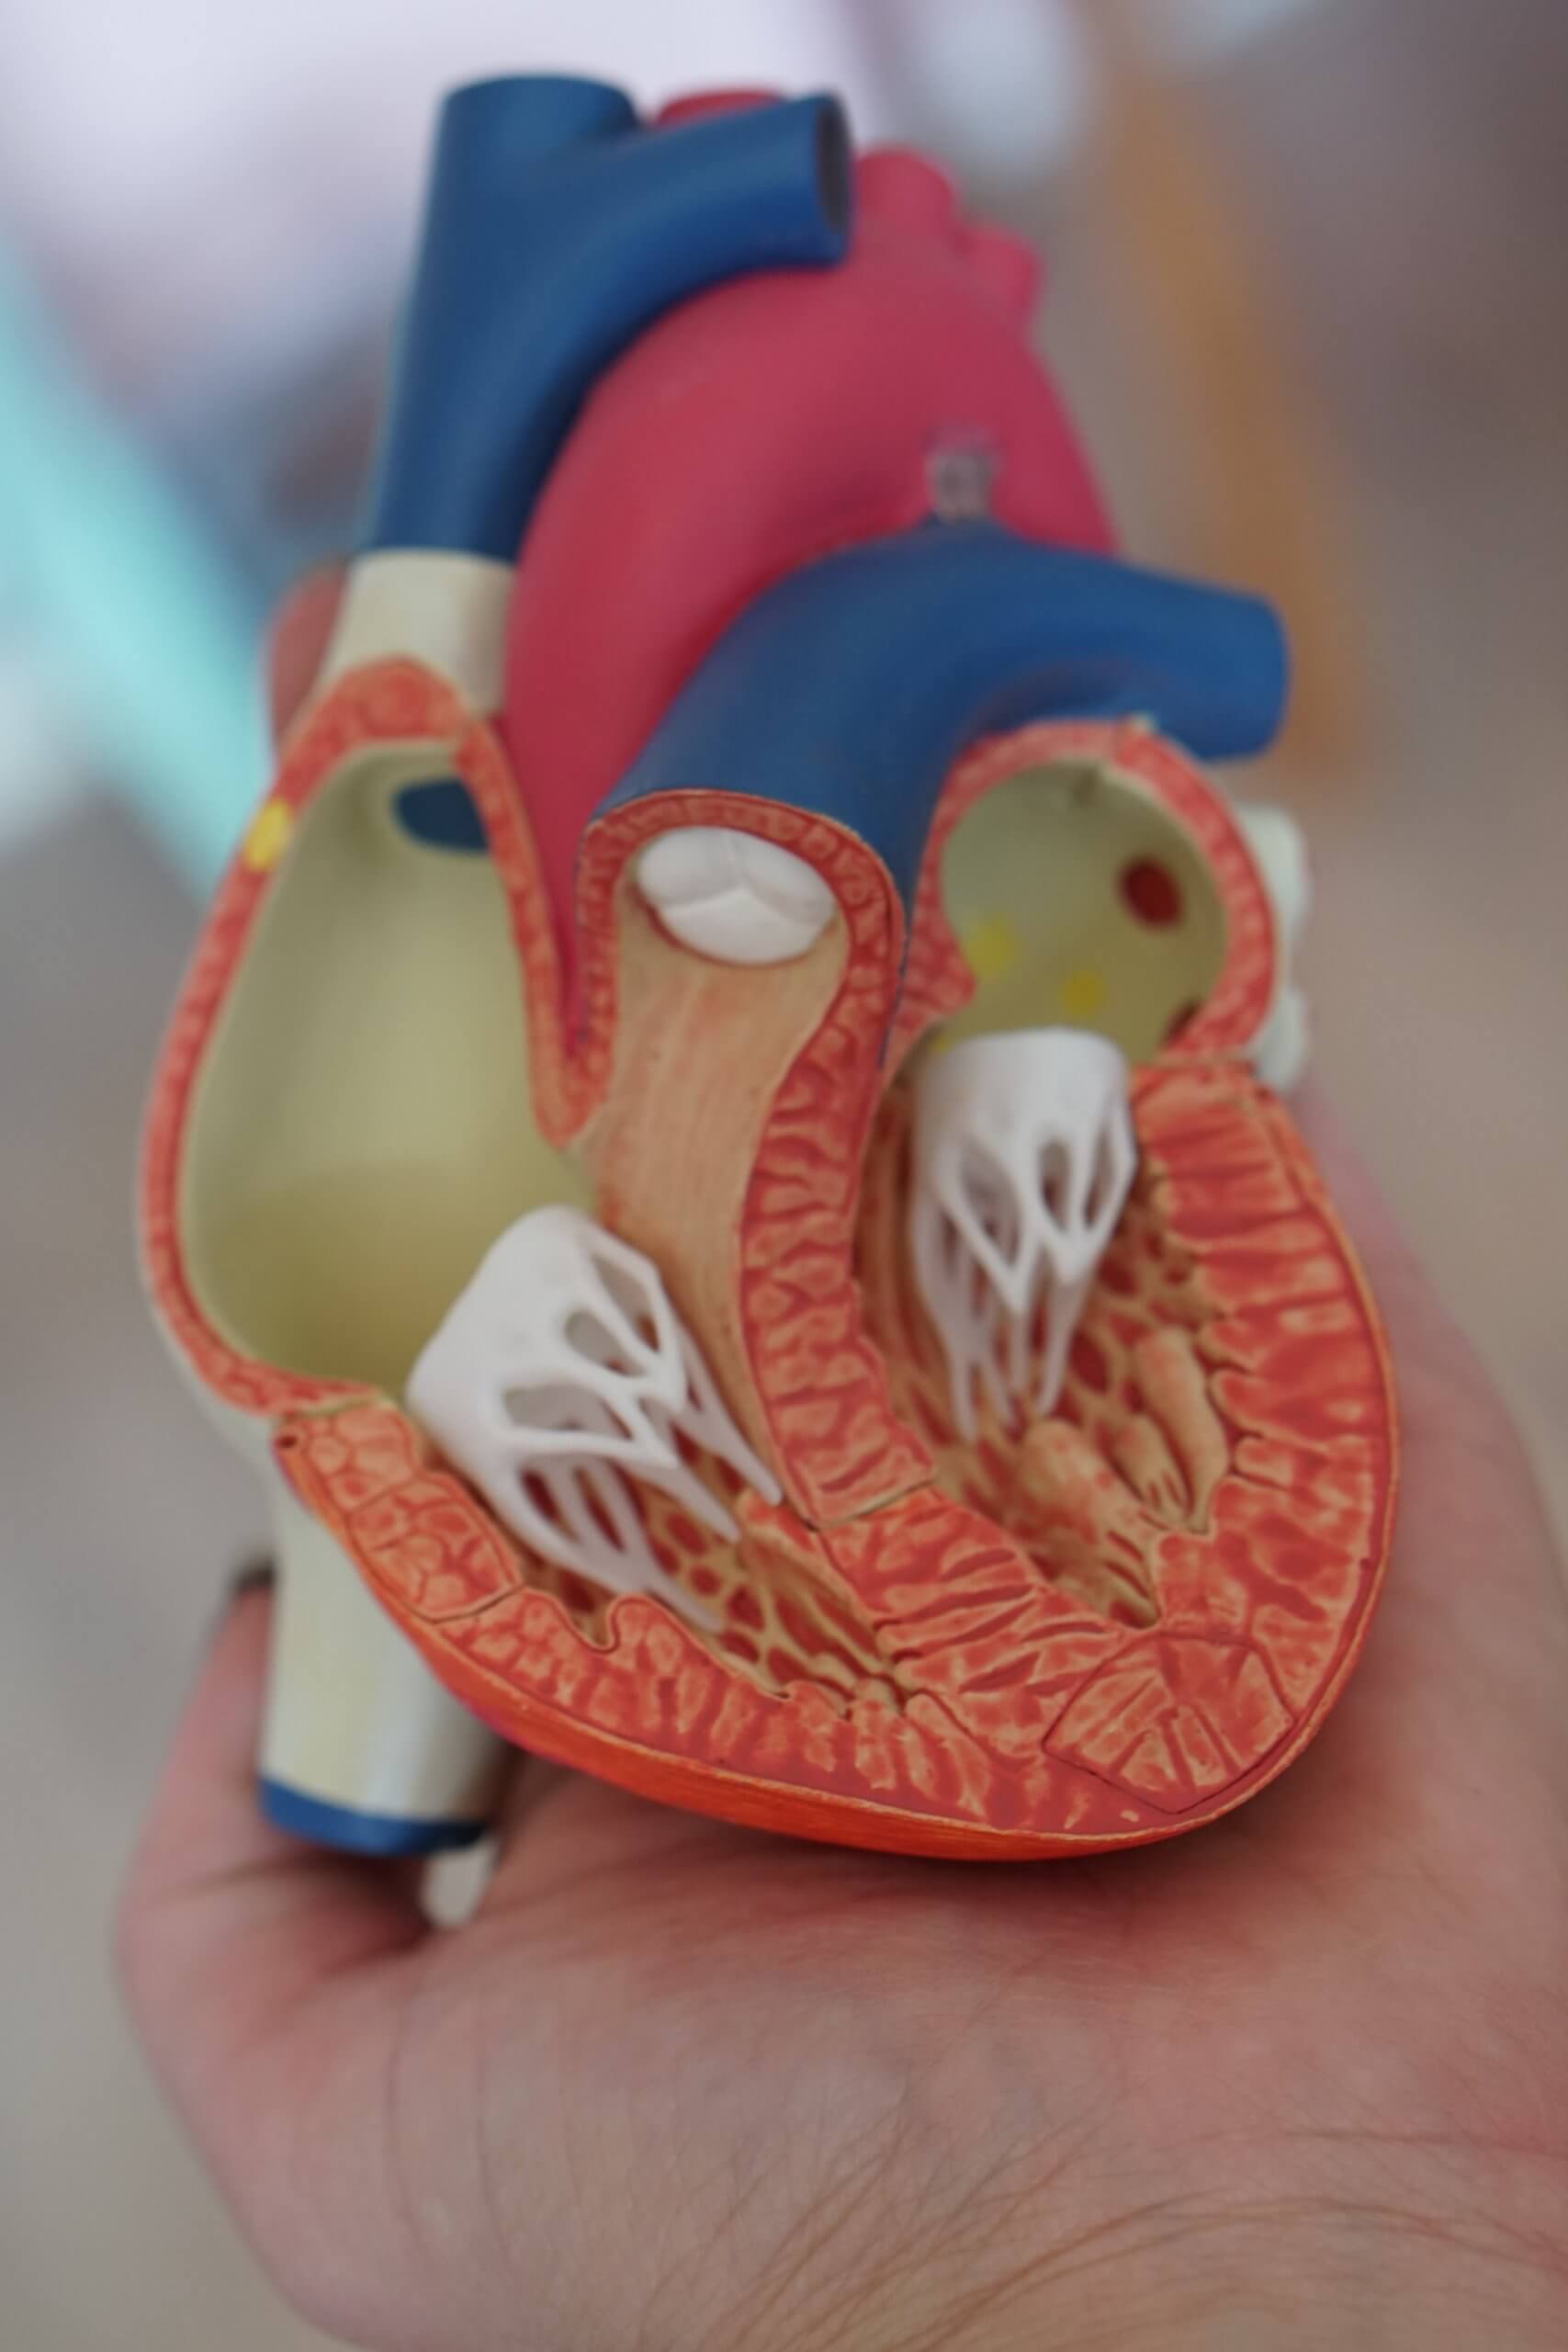 model of a heart dissected